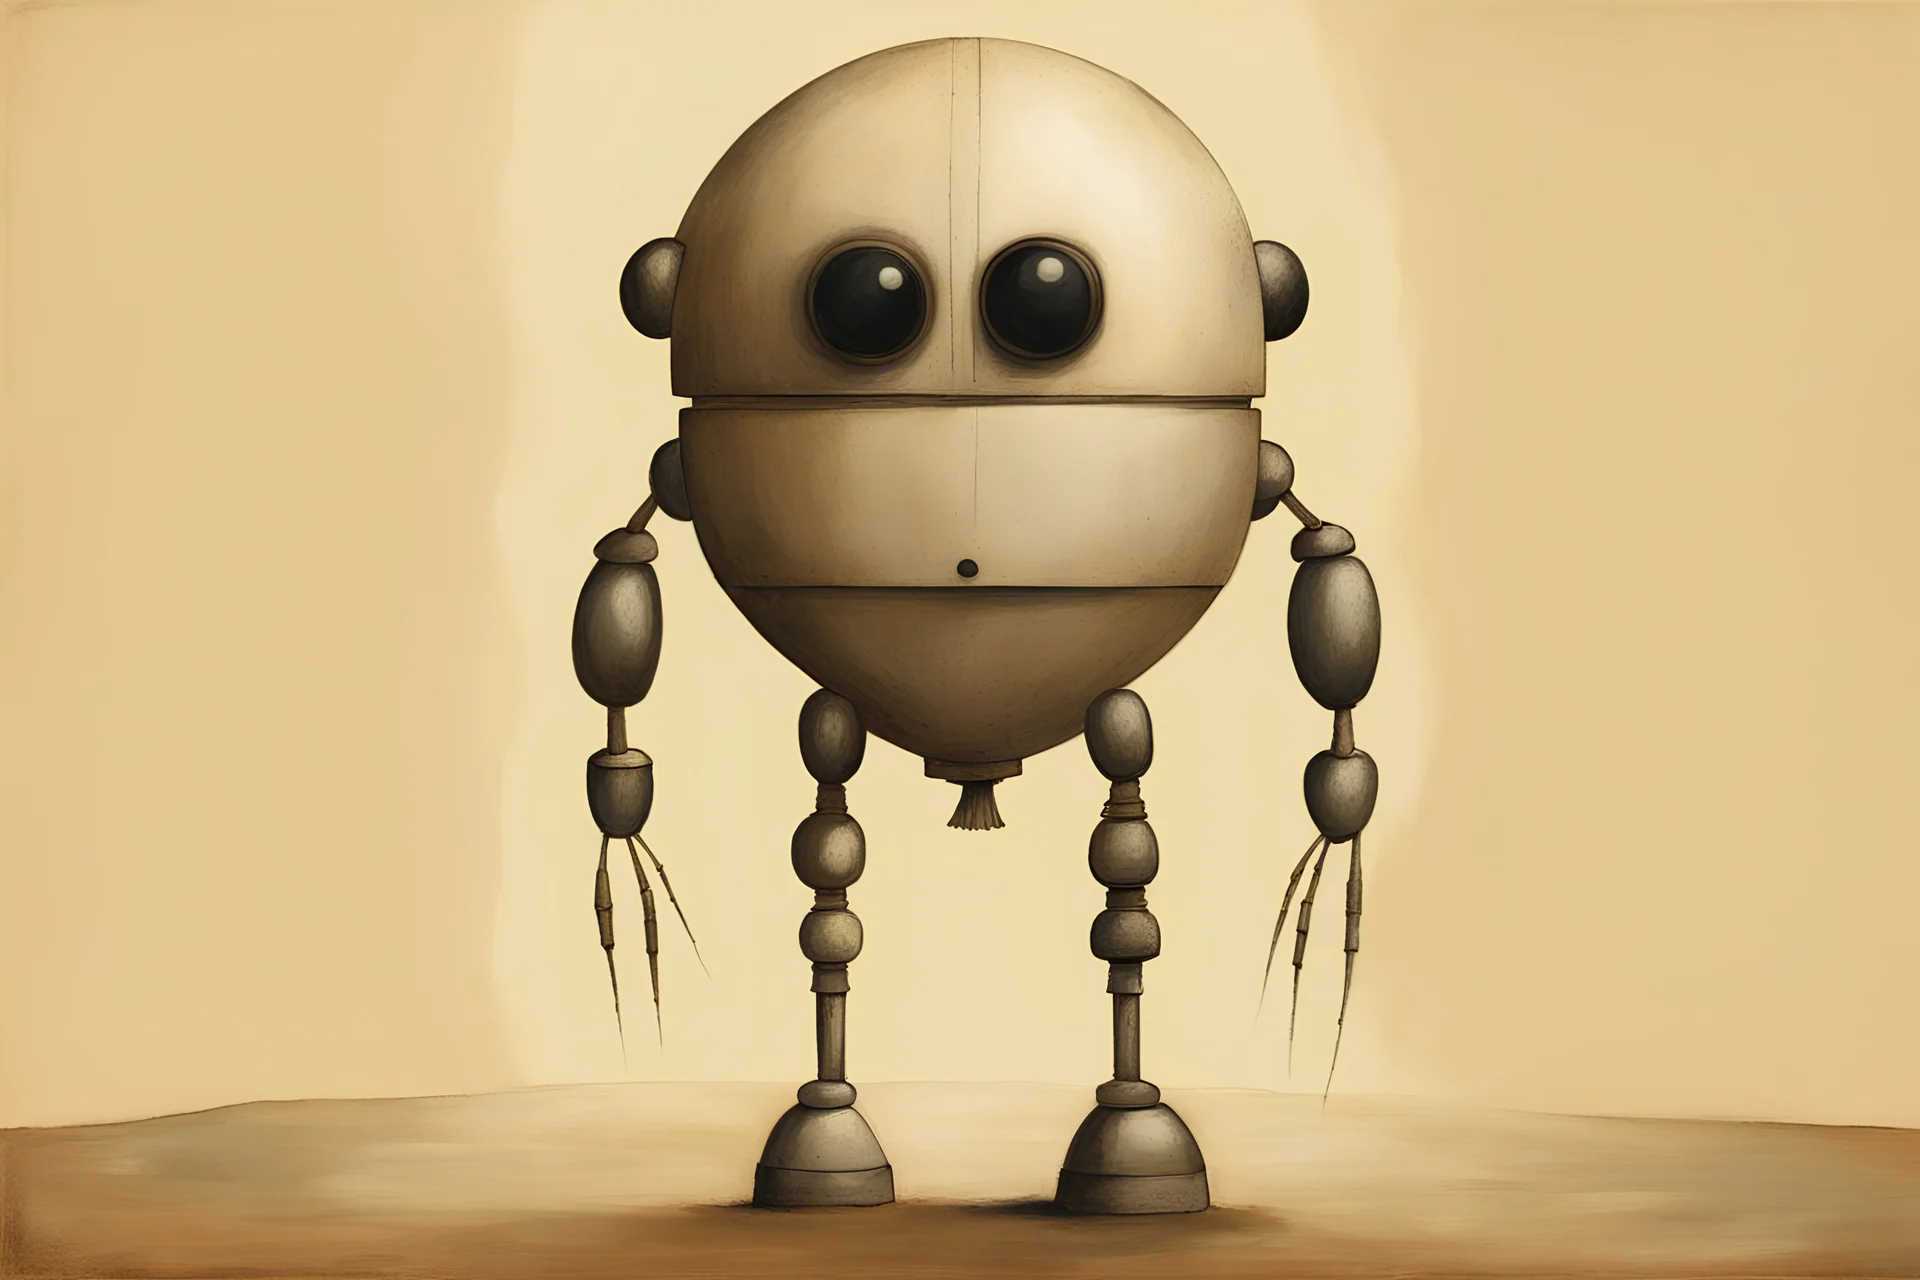 robot, white metal, dome-shaped head, low-placed round black robot eyes, short wide stature, wearing an old brown robe, jon klassen and willem maris painting